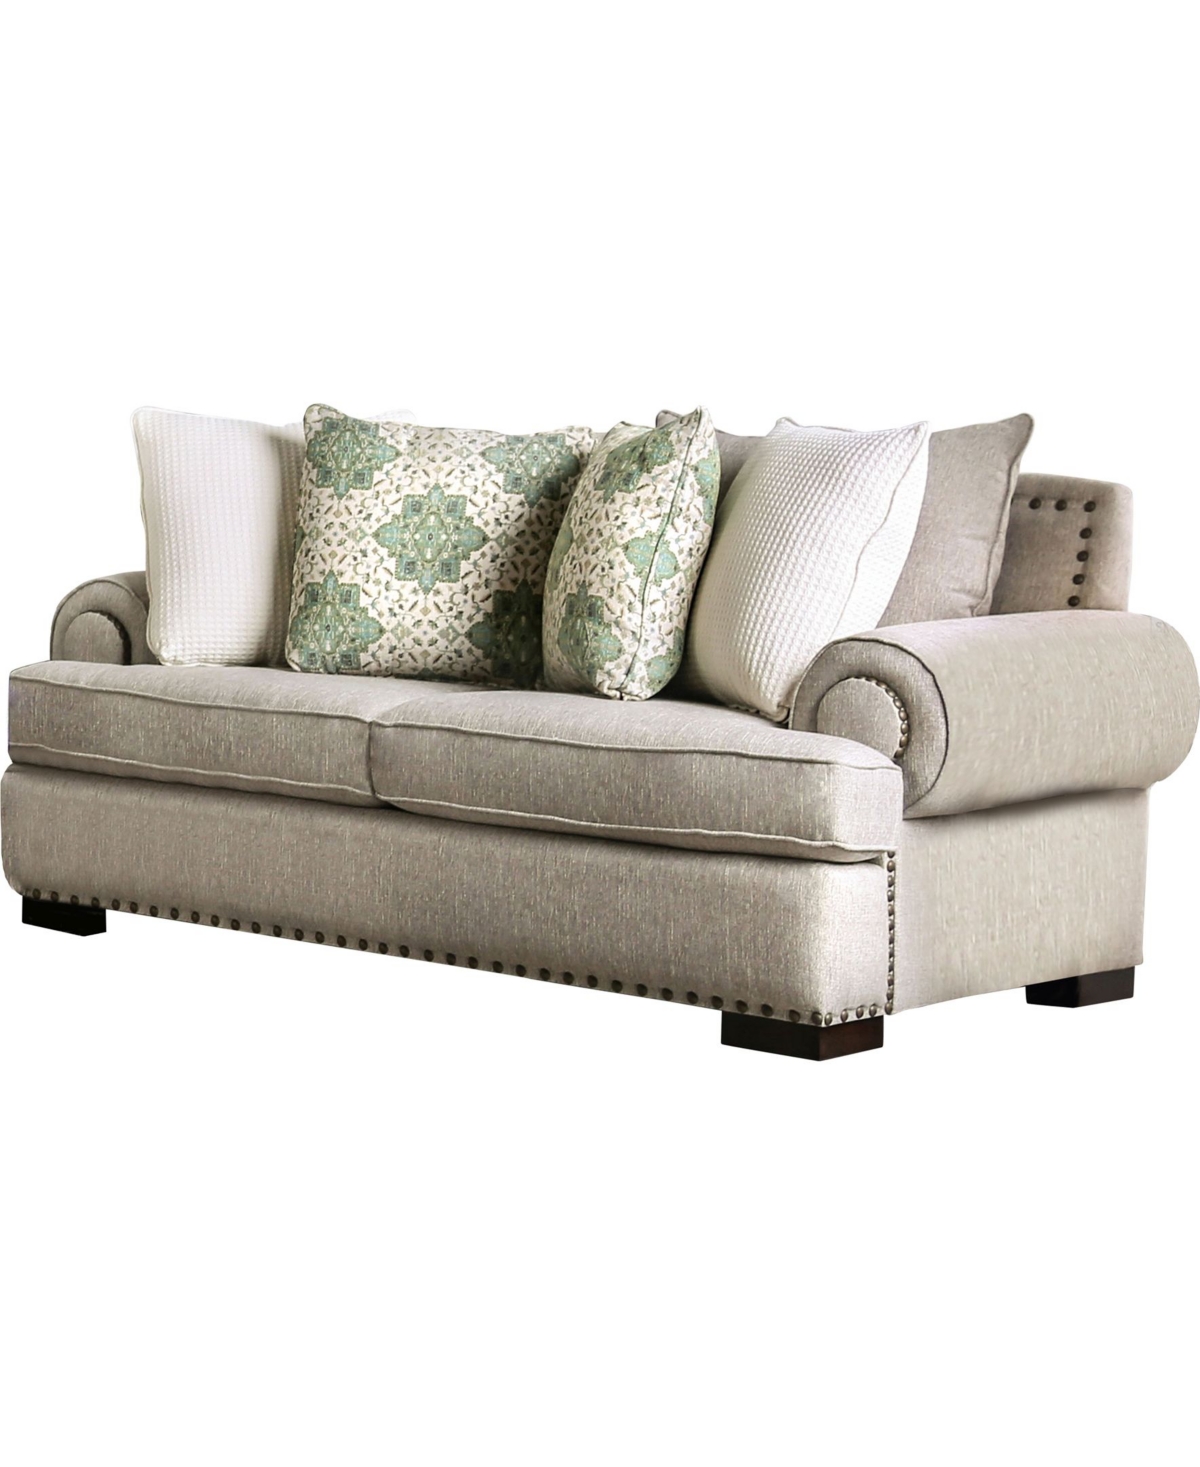 of America Sprell Upholstered Love Seat